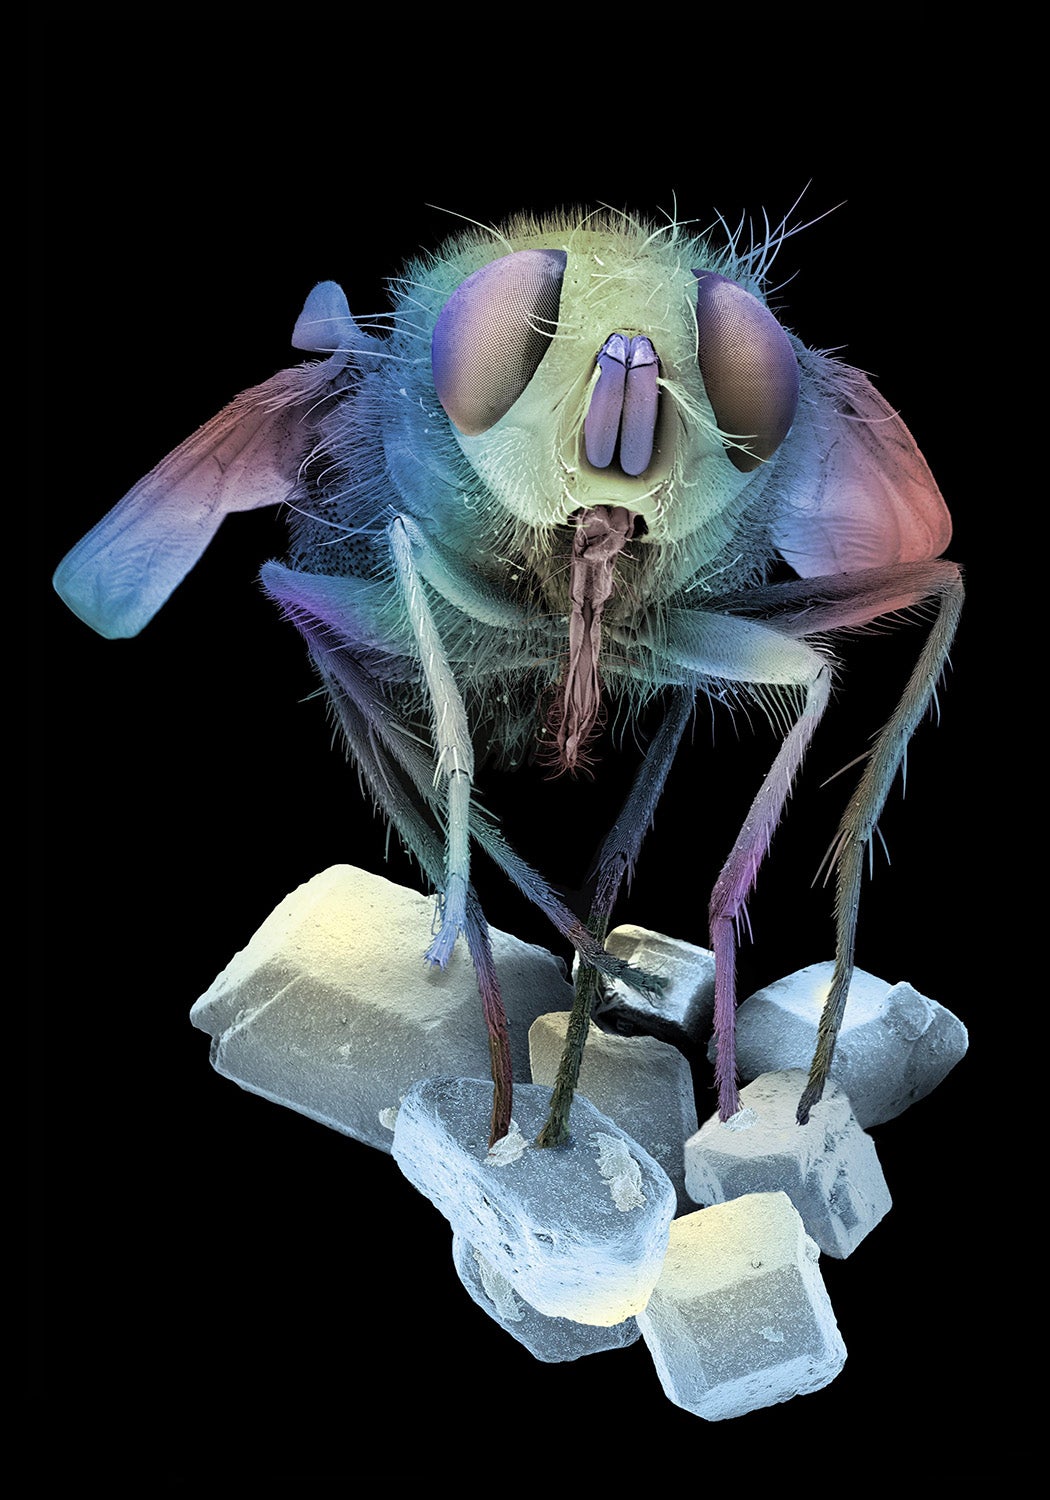 Color-enhanced image of a fly (Musca domestica) standing on sugar crystals